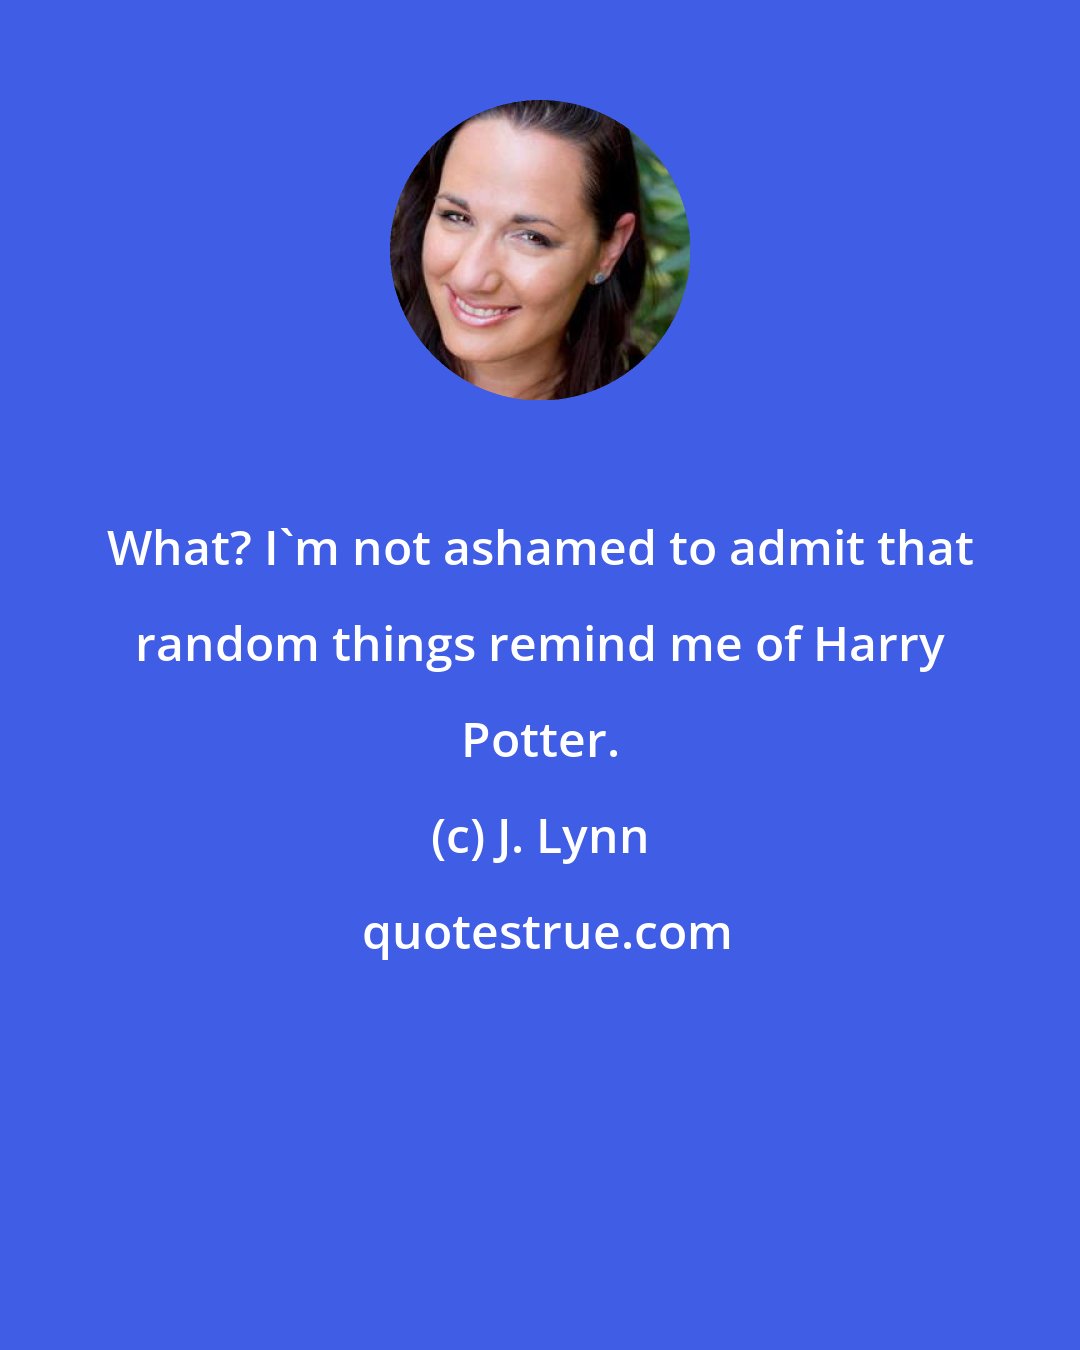 J. Lynn: What? I'm not ashamed to admit that random things remind me of Harry Potter.